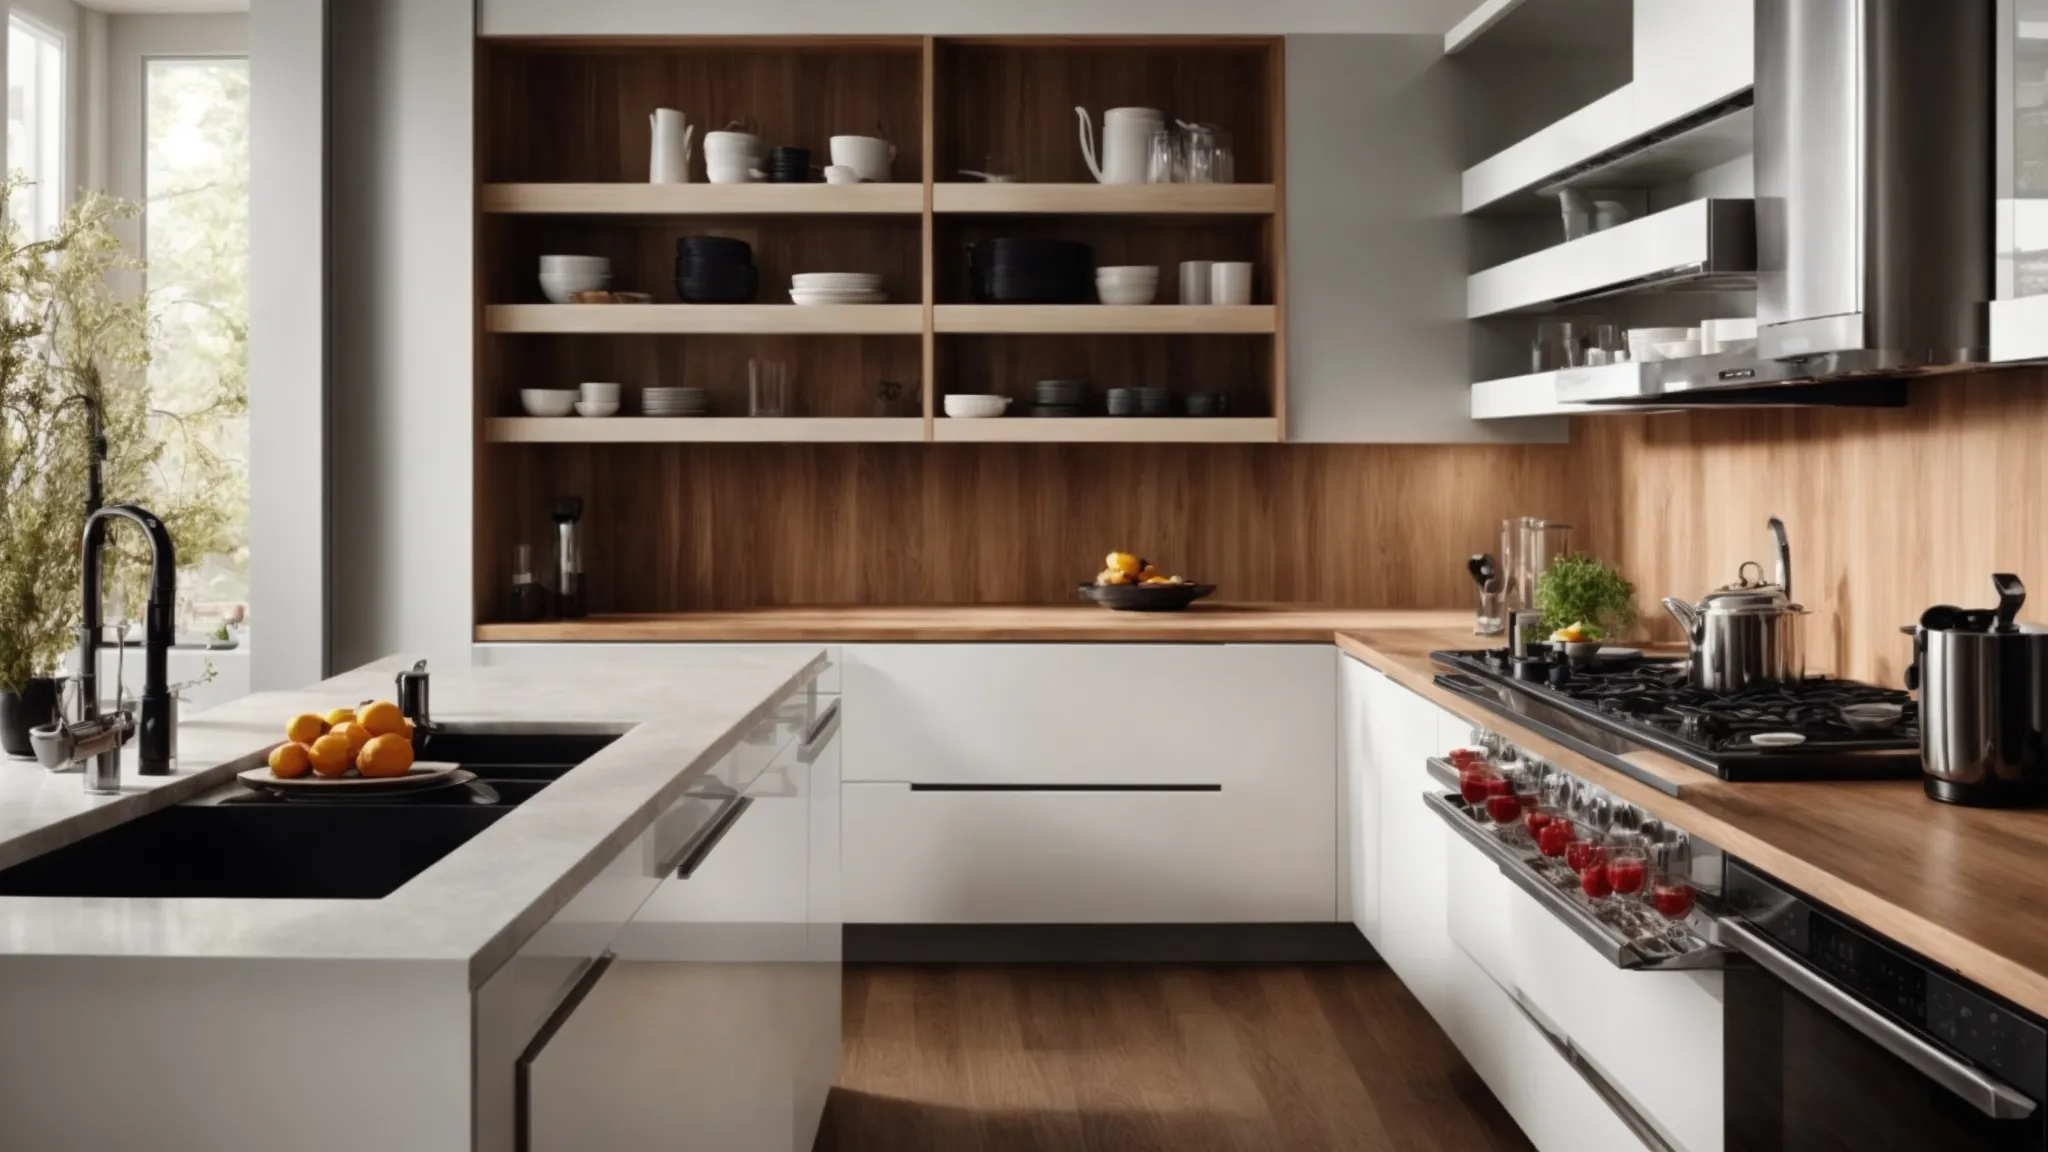 Barrie Kitchen Renovations-10 Essential Do's and Don'ts for Homeowners